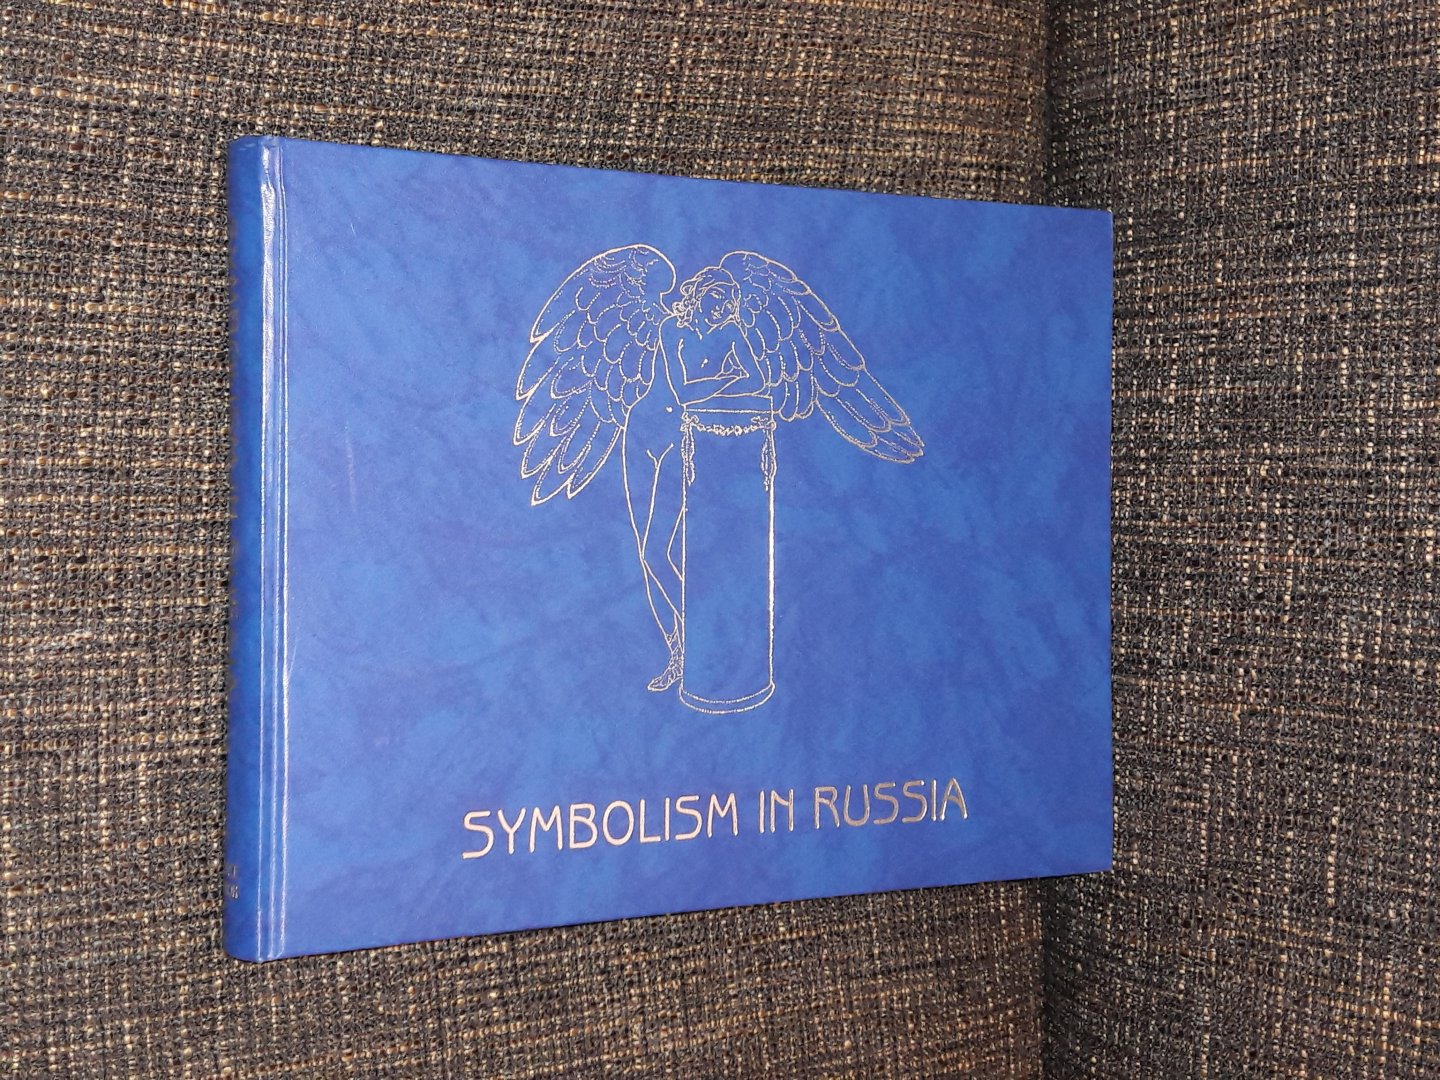 The State Russian Museum - Symbolism in Russia